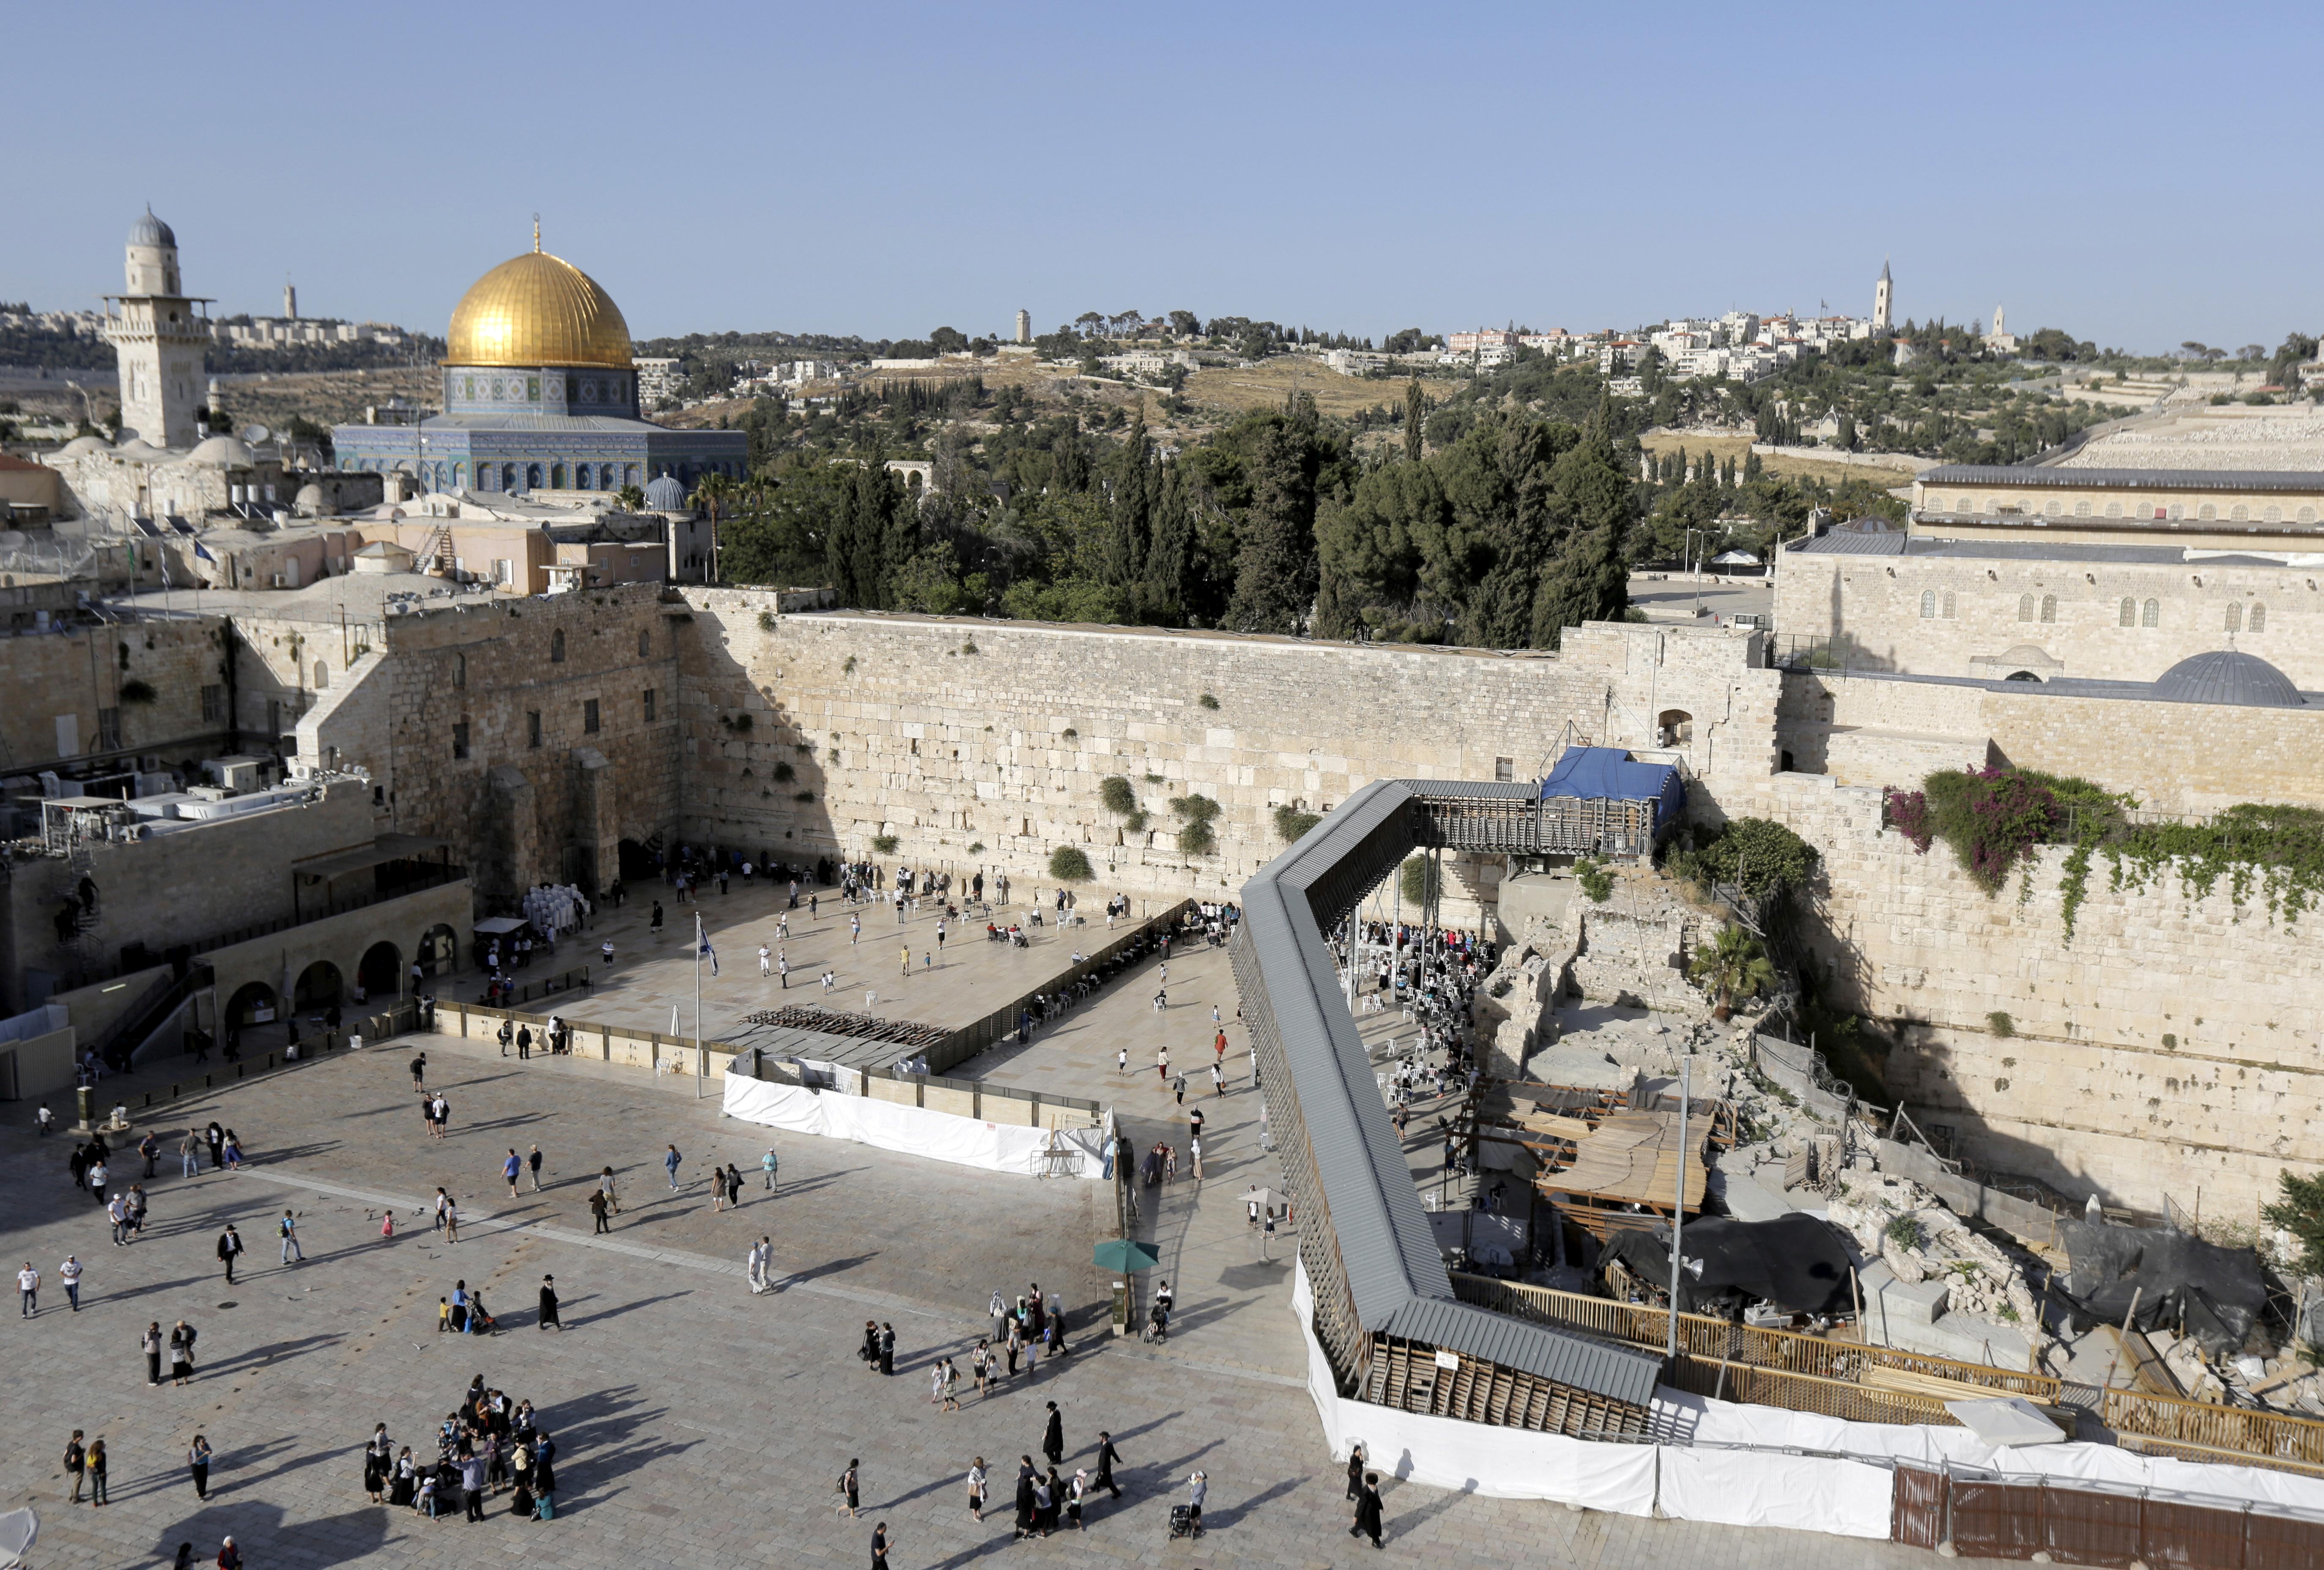 FILE PHOTO: A footbridge leads from the Western Wall to the compound known to Muslims as the Noble Sanctuary and to Jews as Temple Mount, in Jerusalem's Old City June 2, 2015. REUTERS/Ammar Awad/File Photo